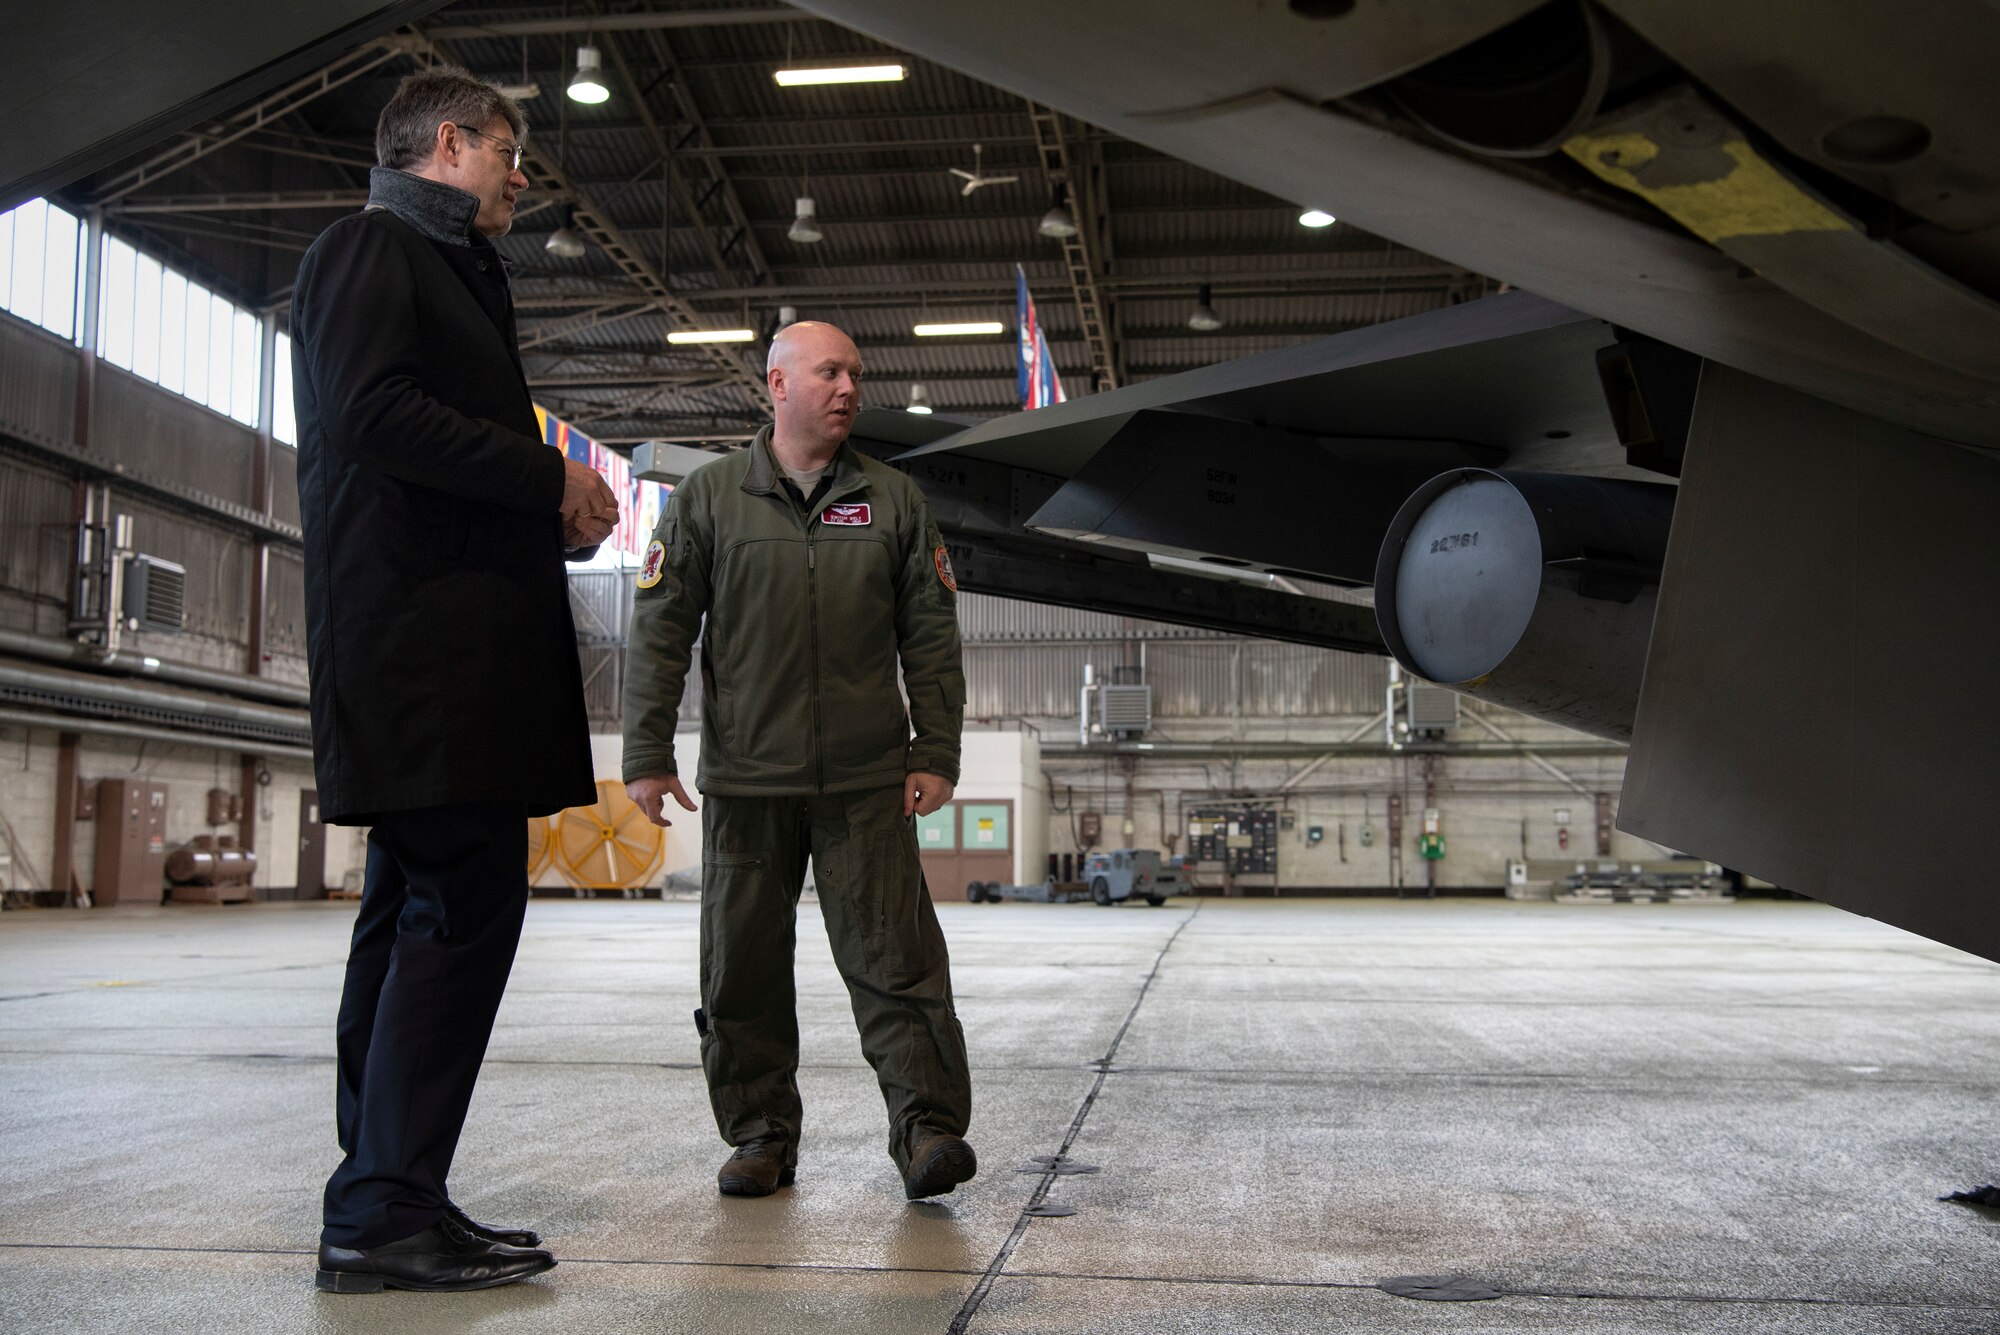 U.S. Air Force Lt. Col. David Welt, 52nd Operations Support Squadron director of operations, right, speaks with Patrick Schnieder, member of the German Federal Parliament in Berlin, left, in Hangar 1 at Spangdahlem Air Base, Germany, Jan. 24, 2019. Welt showed Schnieder functions of a F-16 Fighting Falcon. Schnieder was provided with a 52nd Fighter Wing mission brief and visited several locations on base. (U.S. Air Force photo by Airman 1st Class Valerie Seelye)